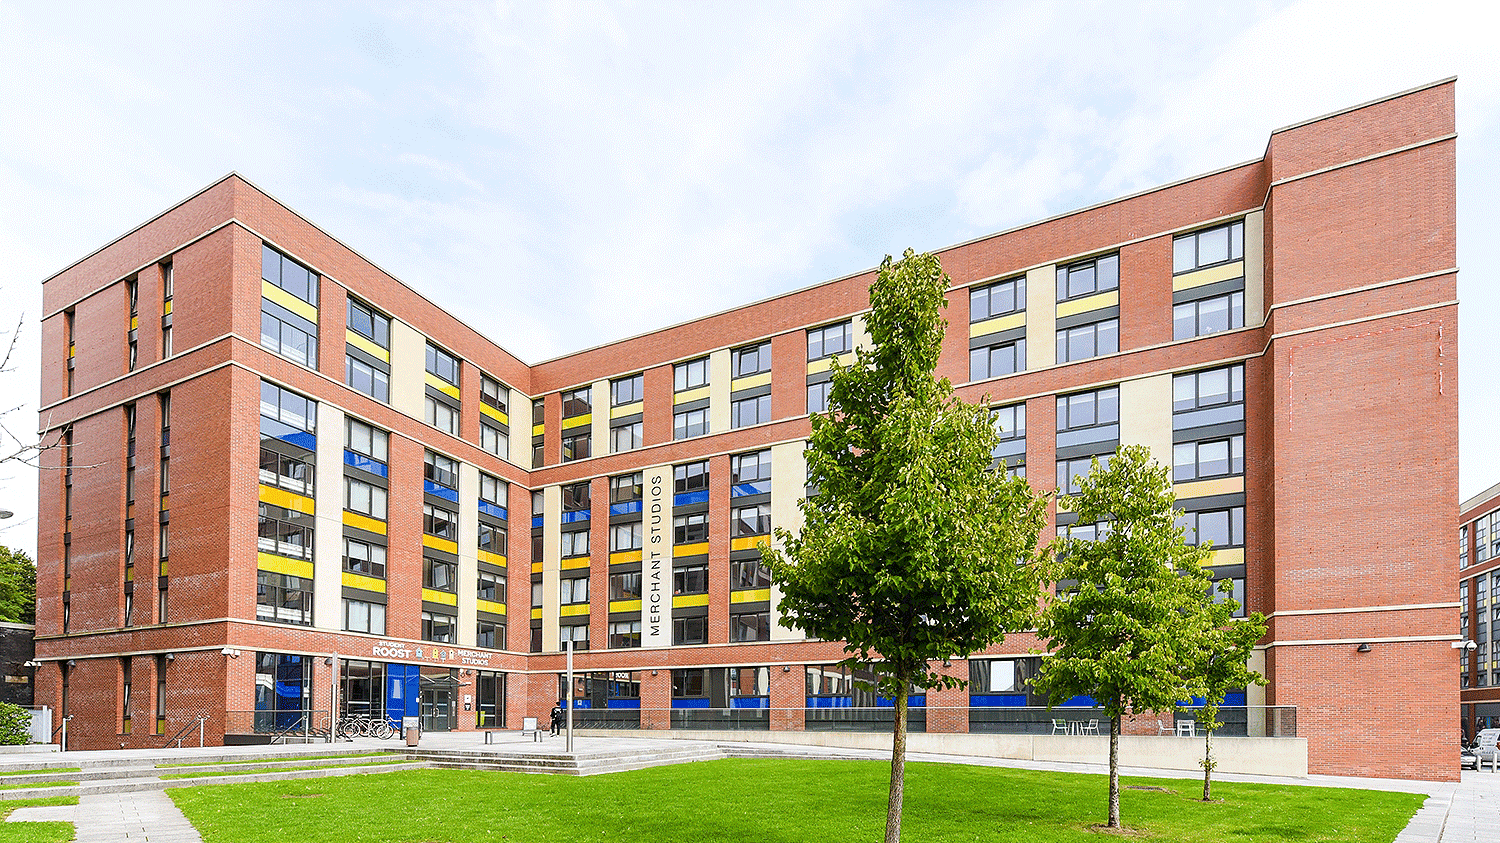 Strathclyde accommodation building